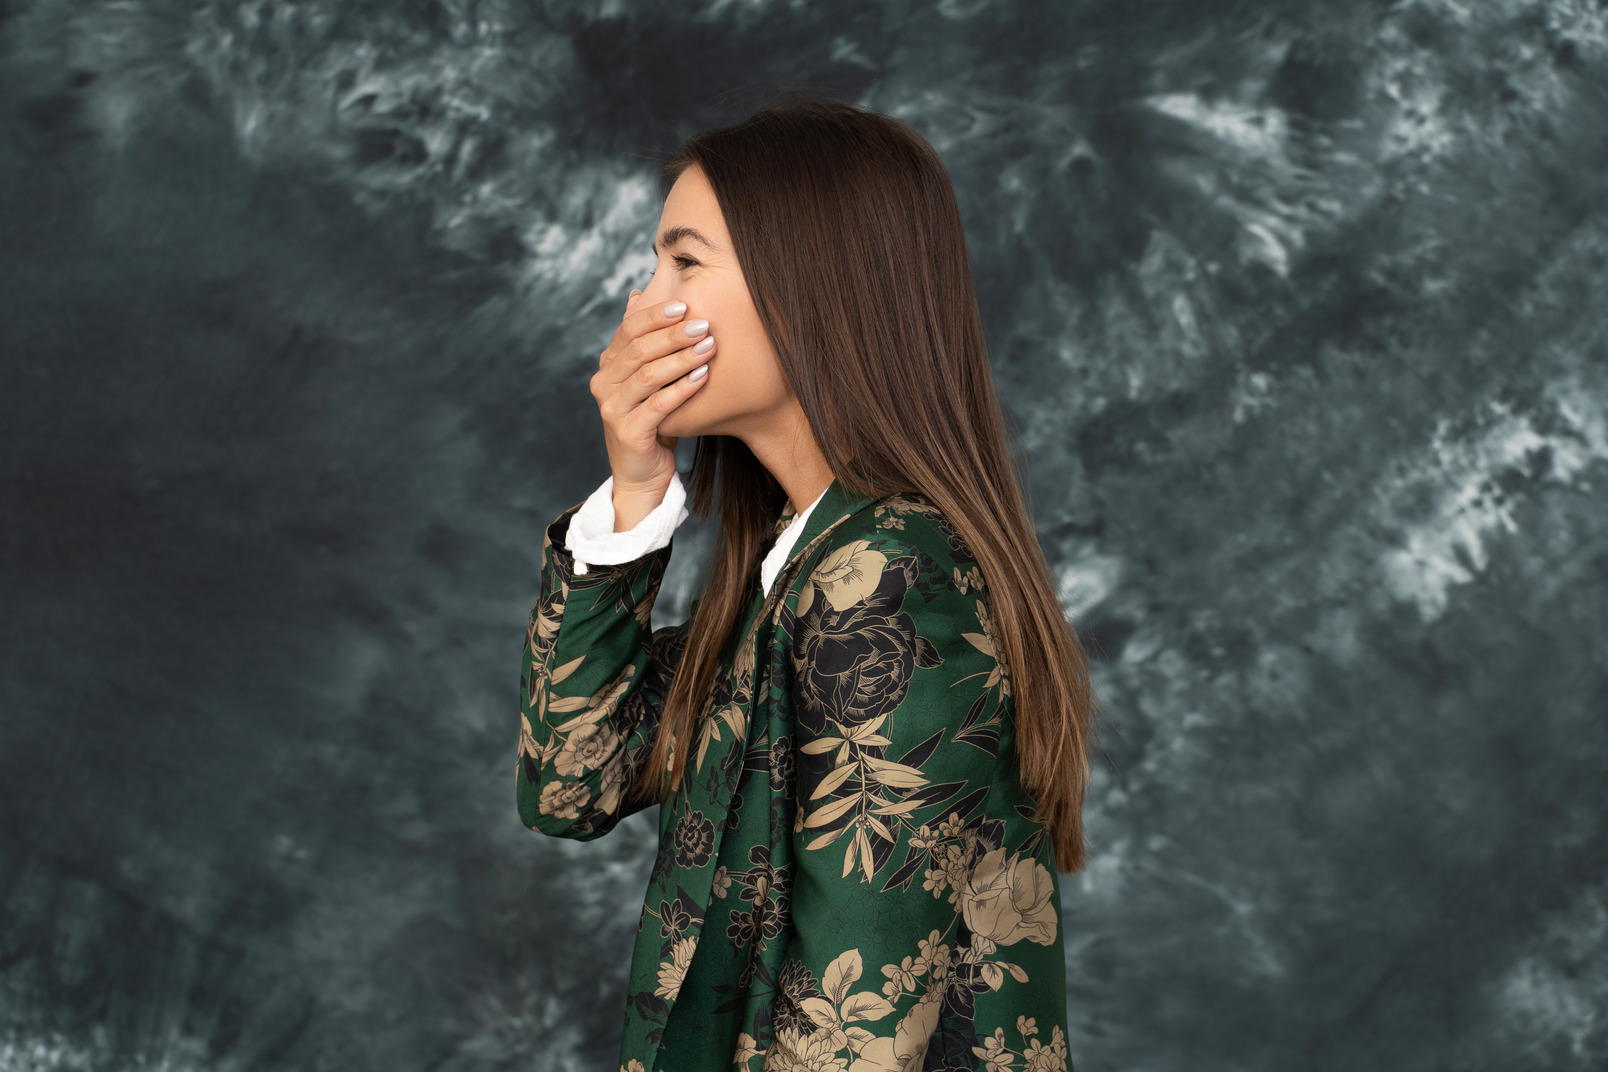 Side photo of young female in green japanese jacket hides her mouth